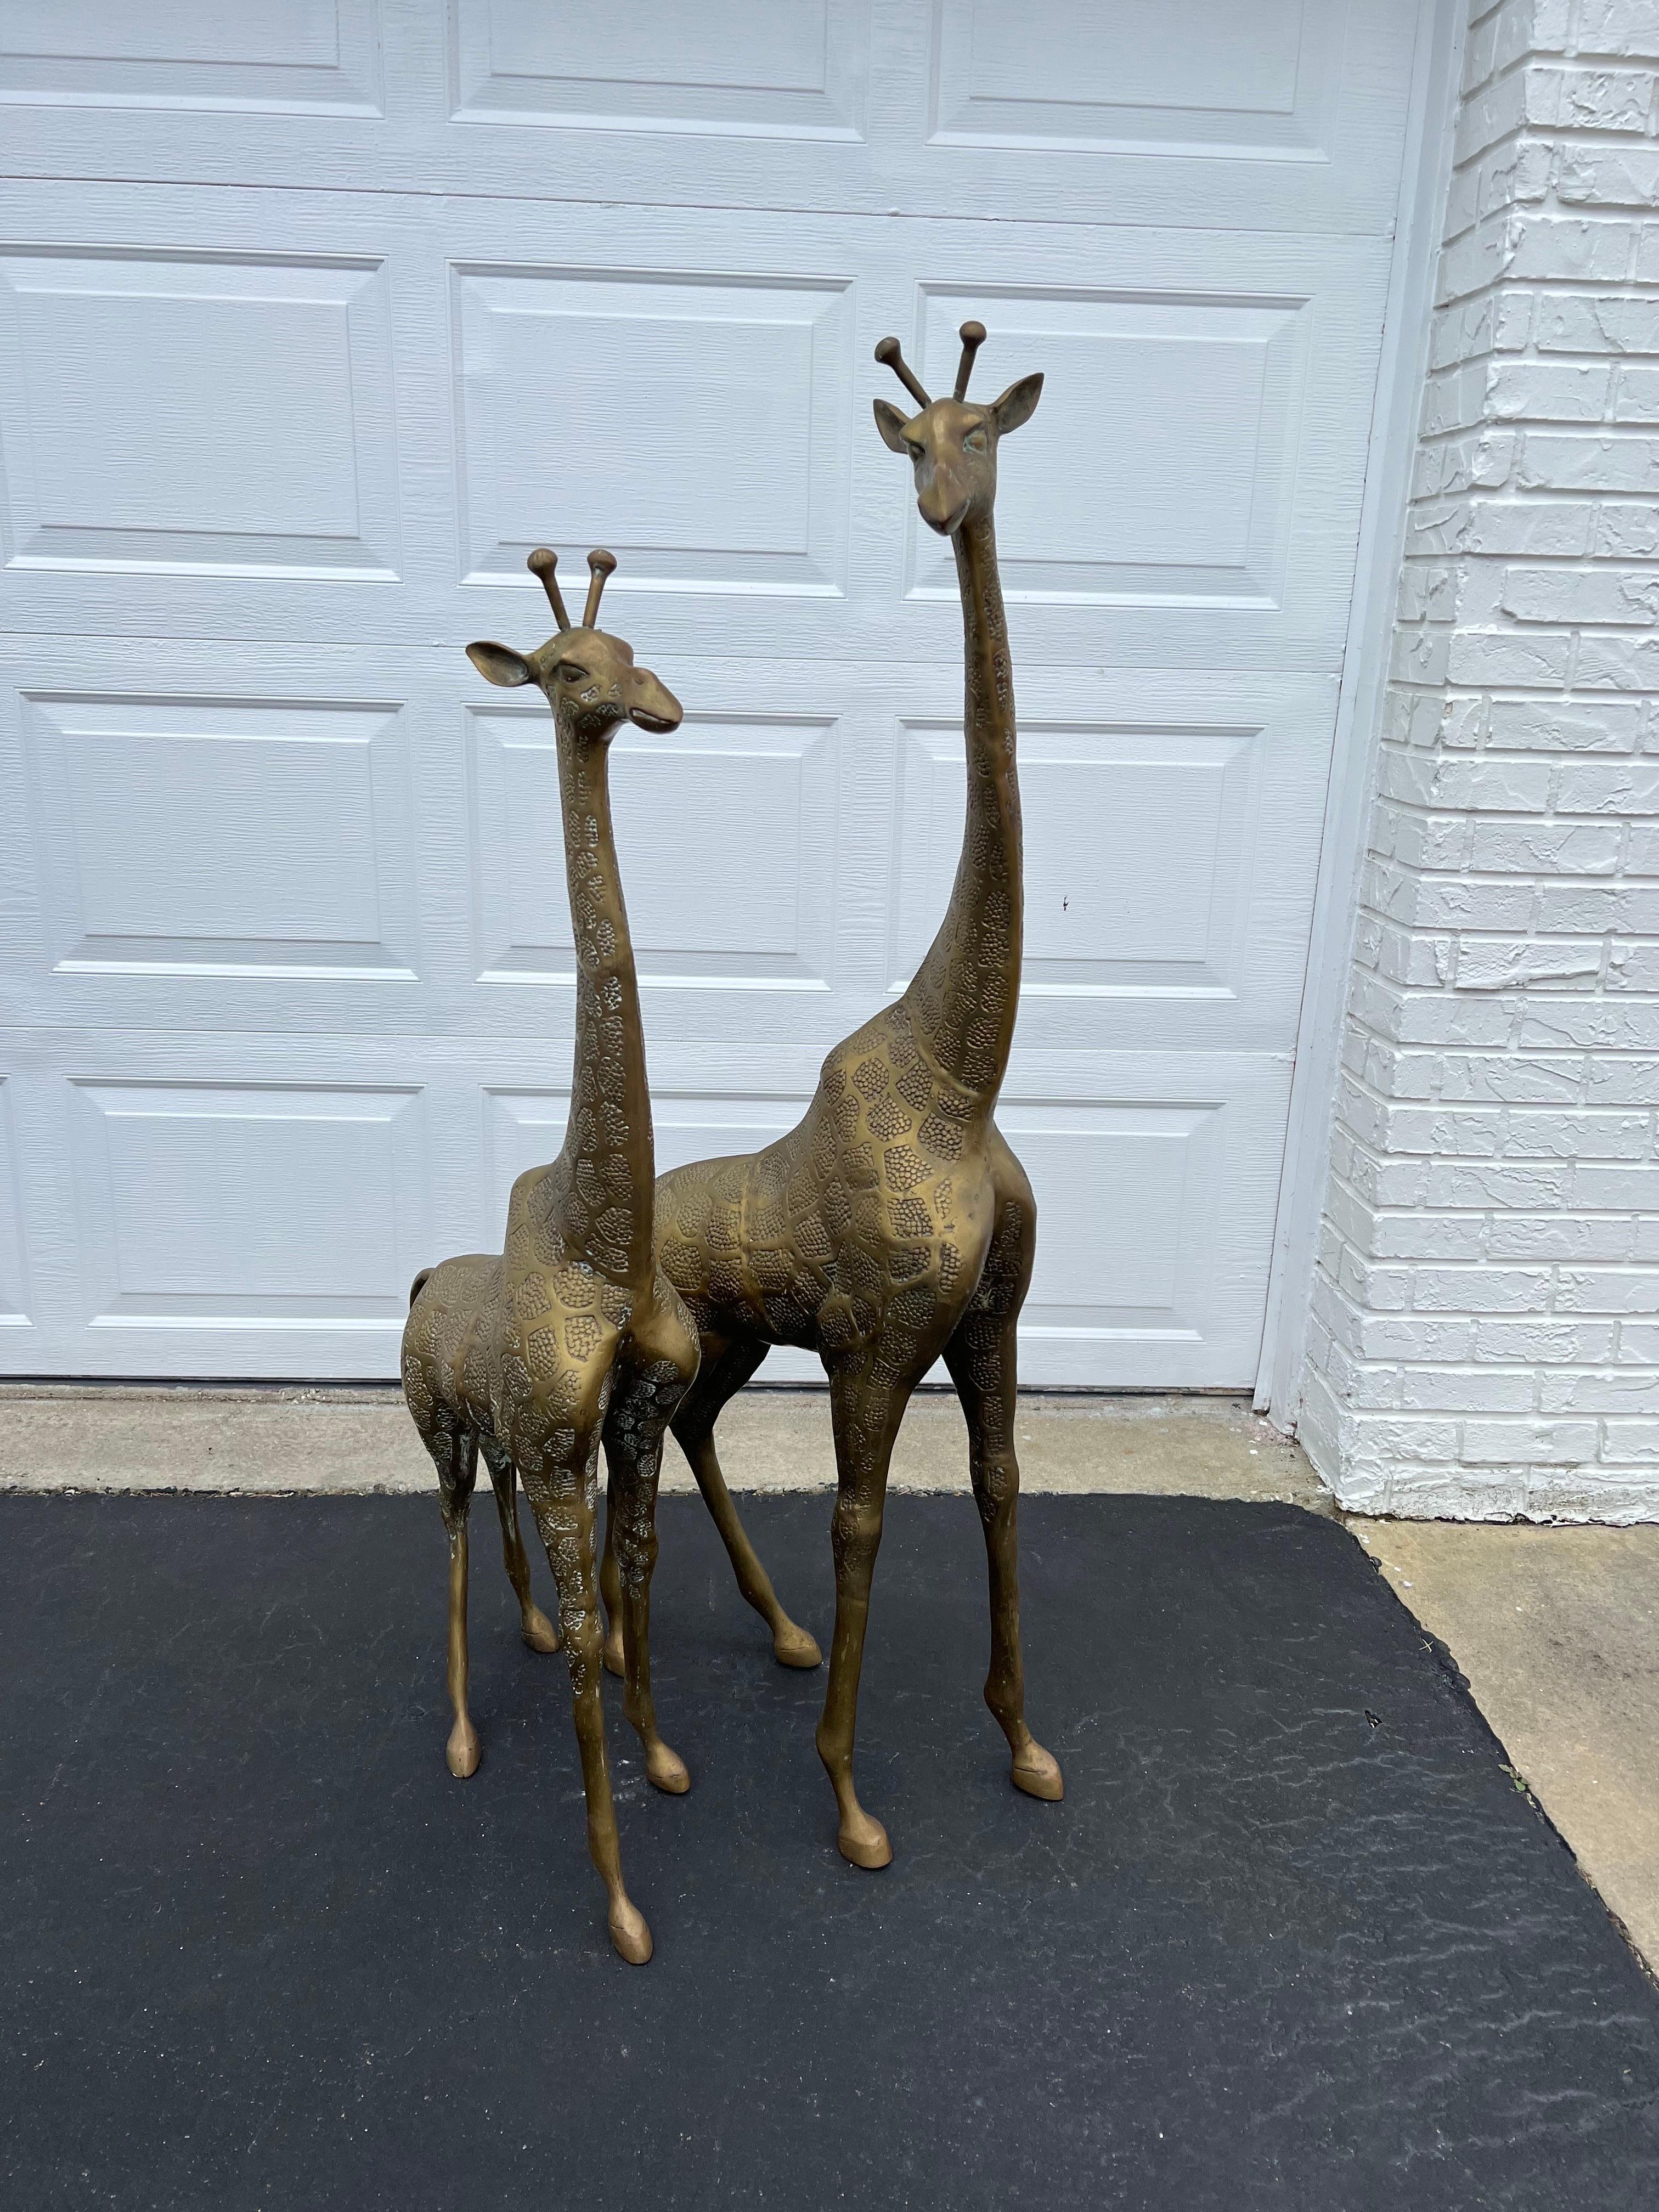 Pair of Hollywood Regency brass giraffes -mother and child. Amazing pair of vintage decorative sculptures, sweet mother and child set. Great for a design statement. Circa 1980-1989 , Possibly by Dolbi Cashier. Dimensions are for larger giraffe.